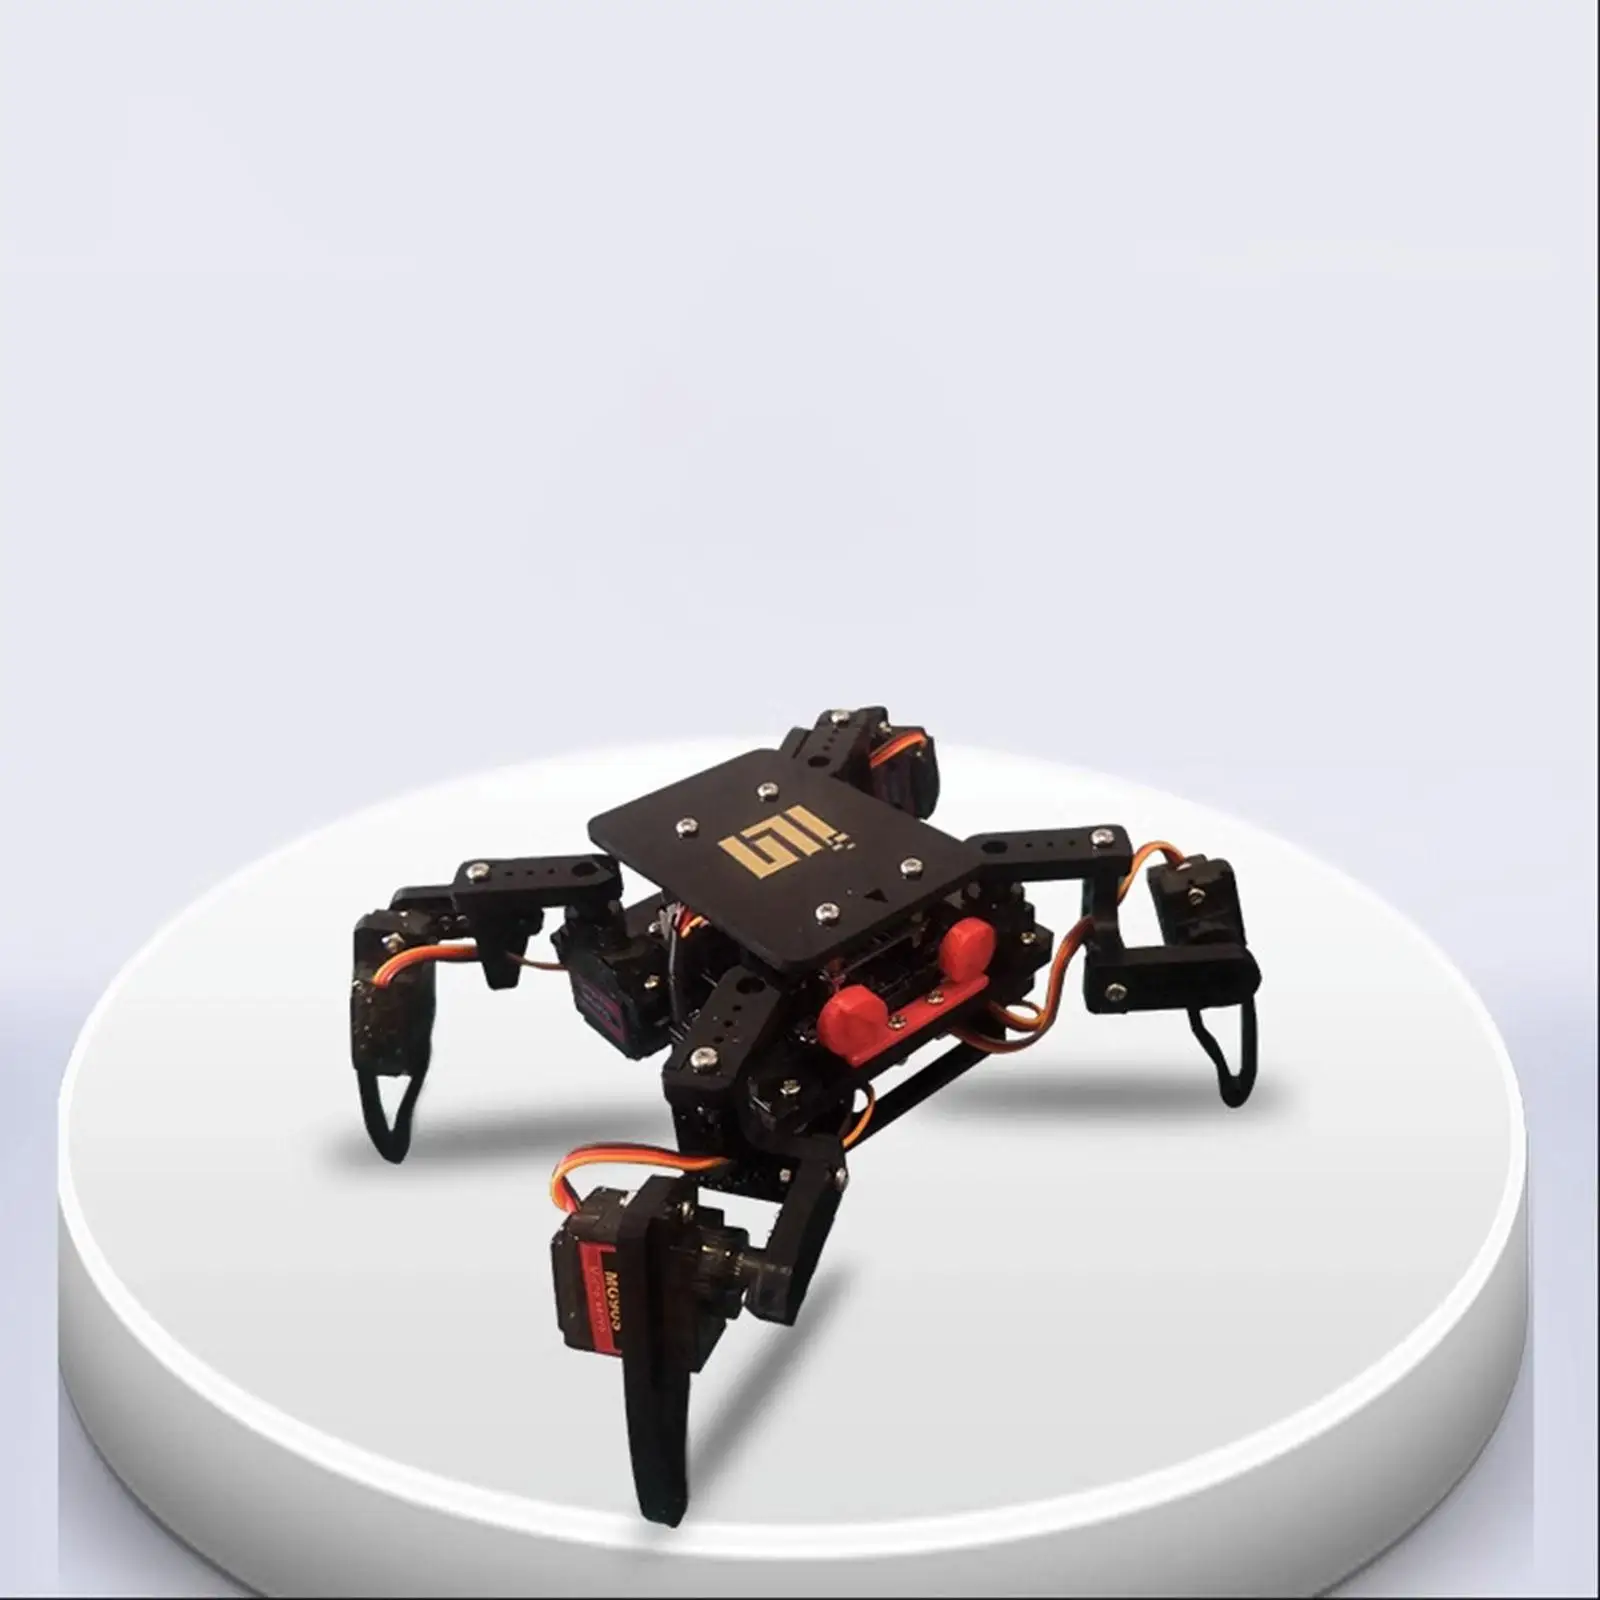 Quadruped Robot Kits App Control Portable Programming Robot Toy for Birthday Gifts Teaching Aids Kids to Learn Program Kids